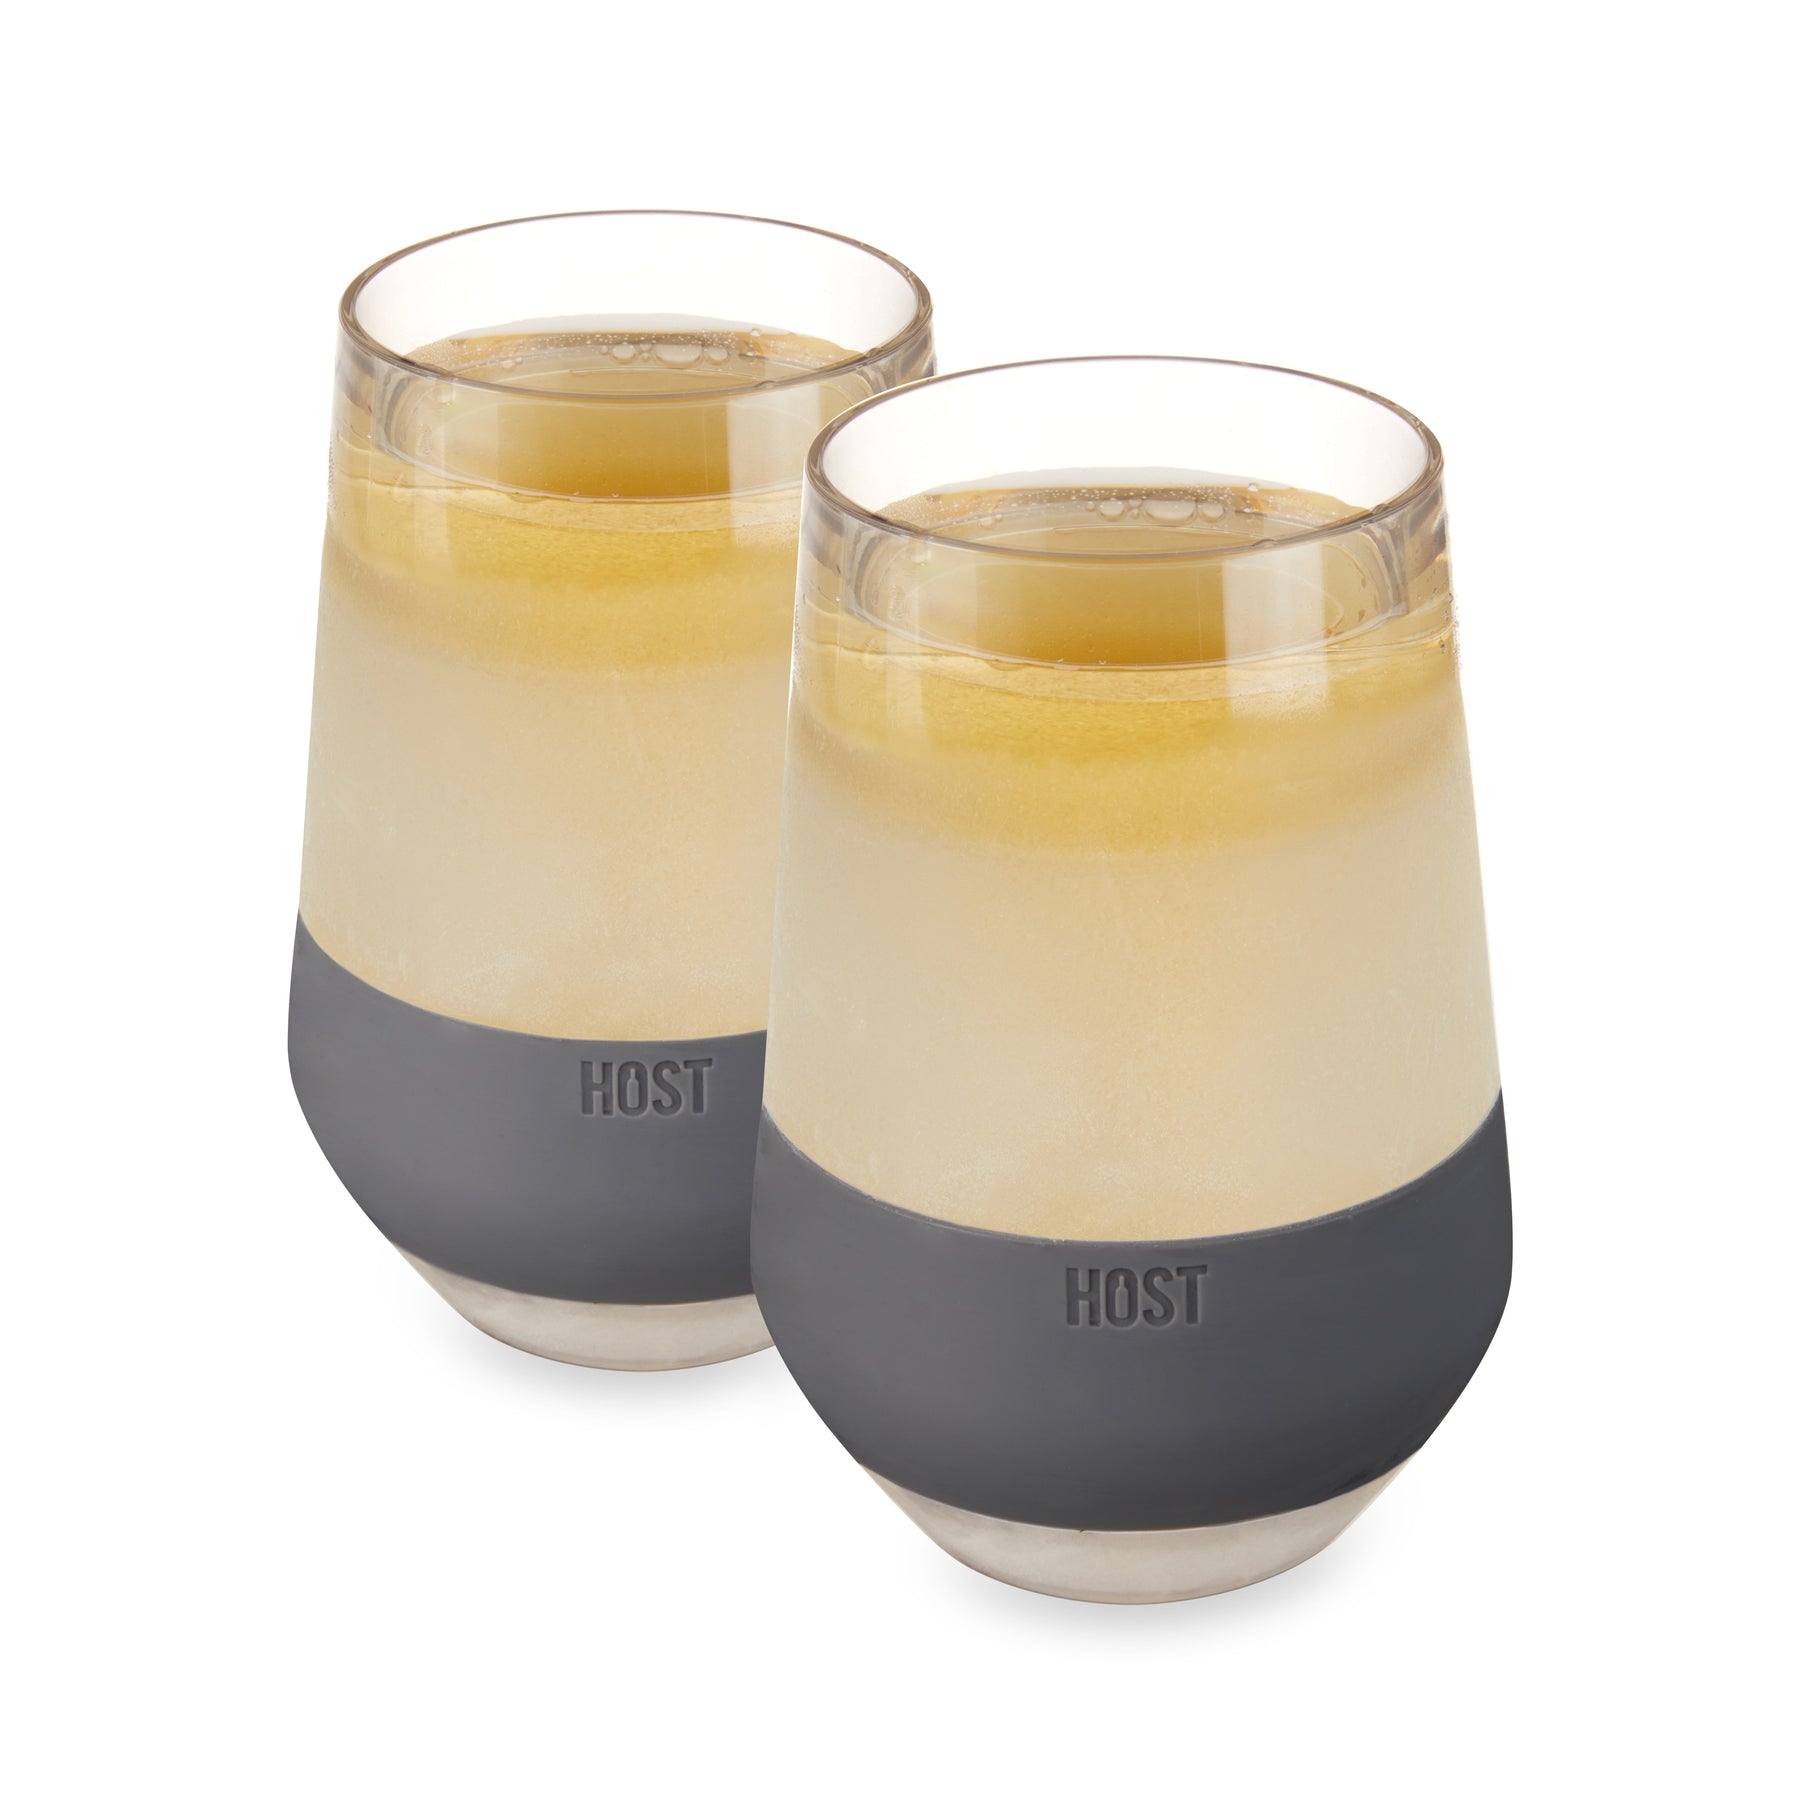 Cooler than Cool Chilled Wine Glass (Set of 2) - The VinePair Store